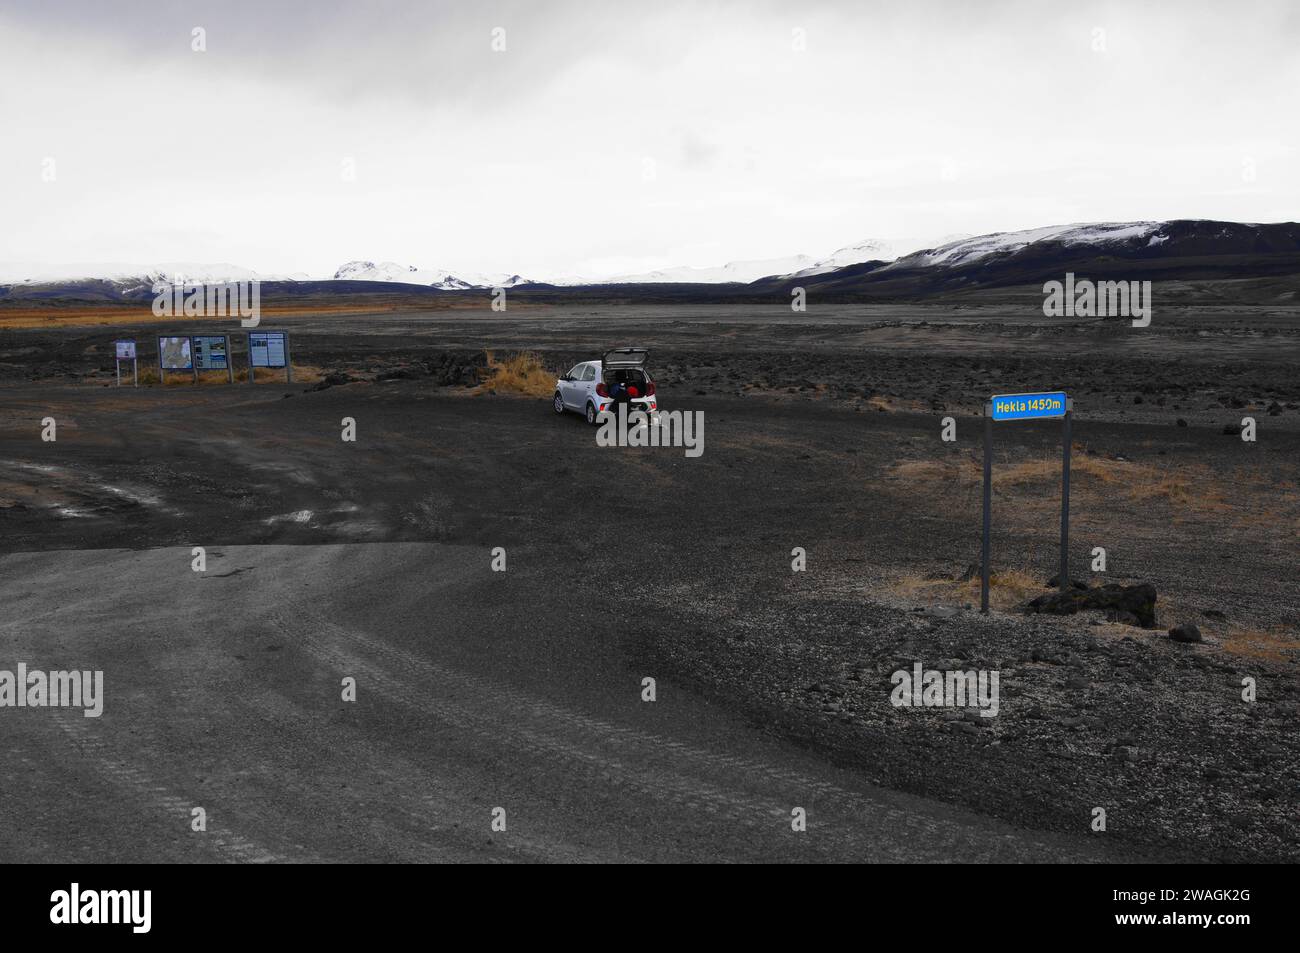 Carpark for access to the Hekla Volcano (or Hecla) which is an active stratovolcano in the south of Iceland with a height of 1,491 m and last erupted Stock Photo